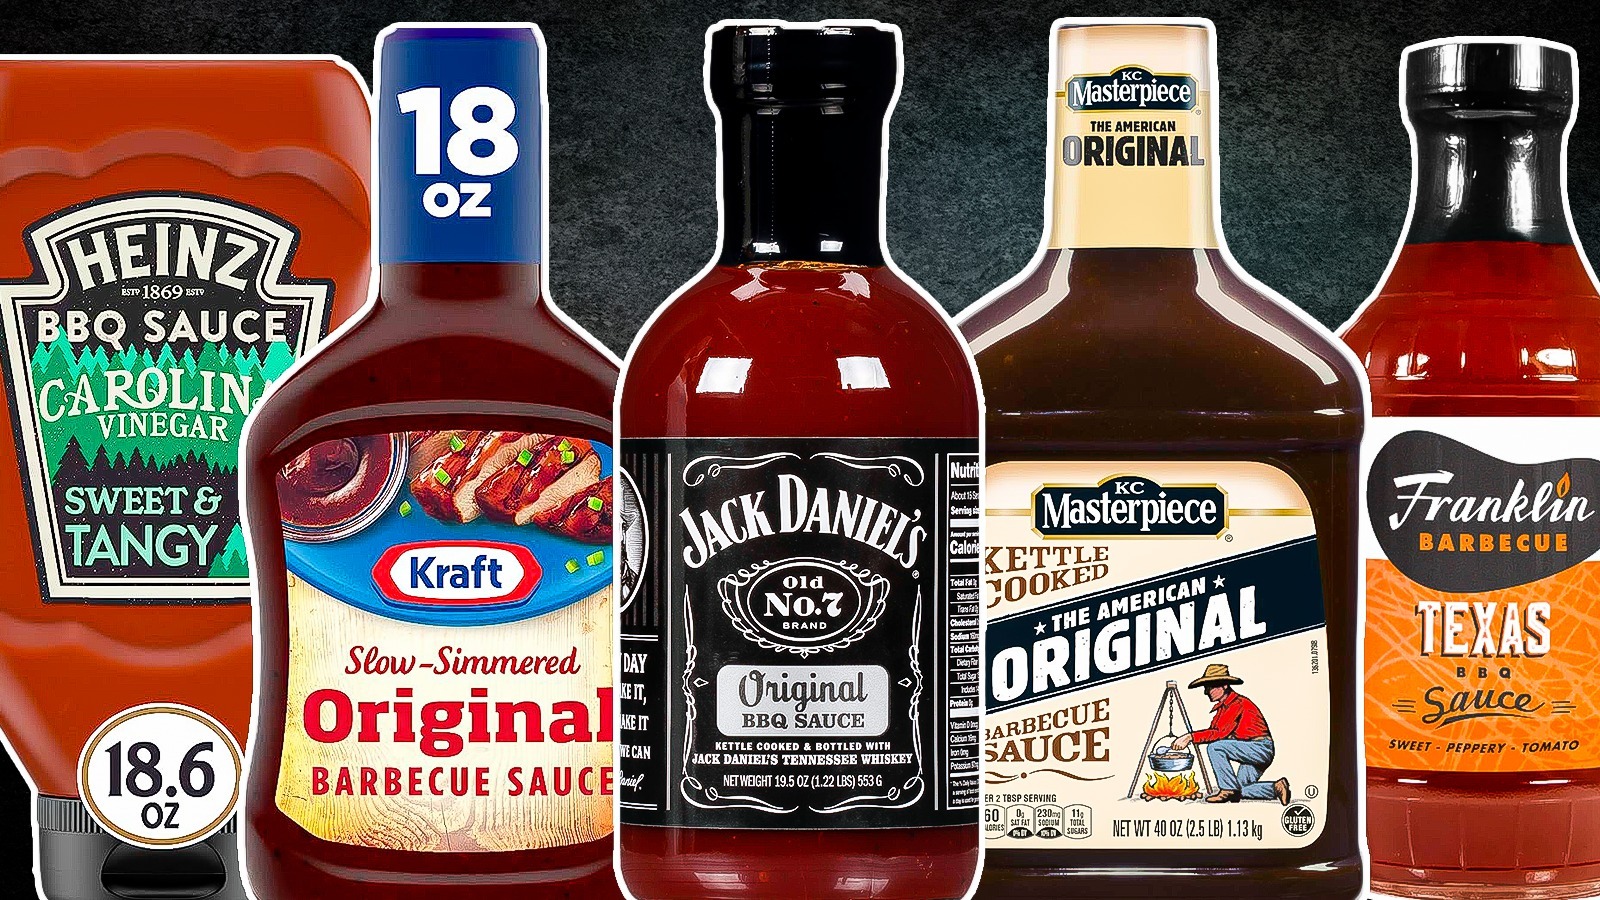 https://www.thedailymeal.com/img/gallery/the-15-best-store-bought-barbecue-sauces-ranked/l-intro-1688573603.jpg